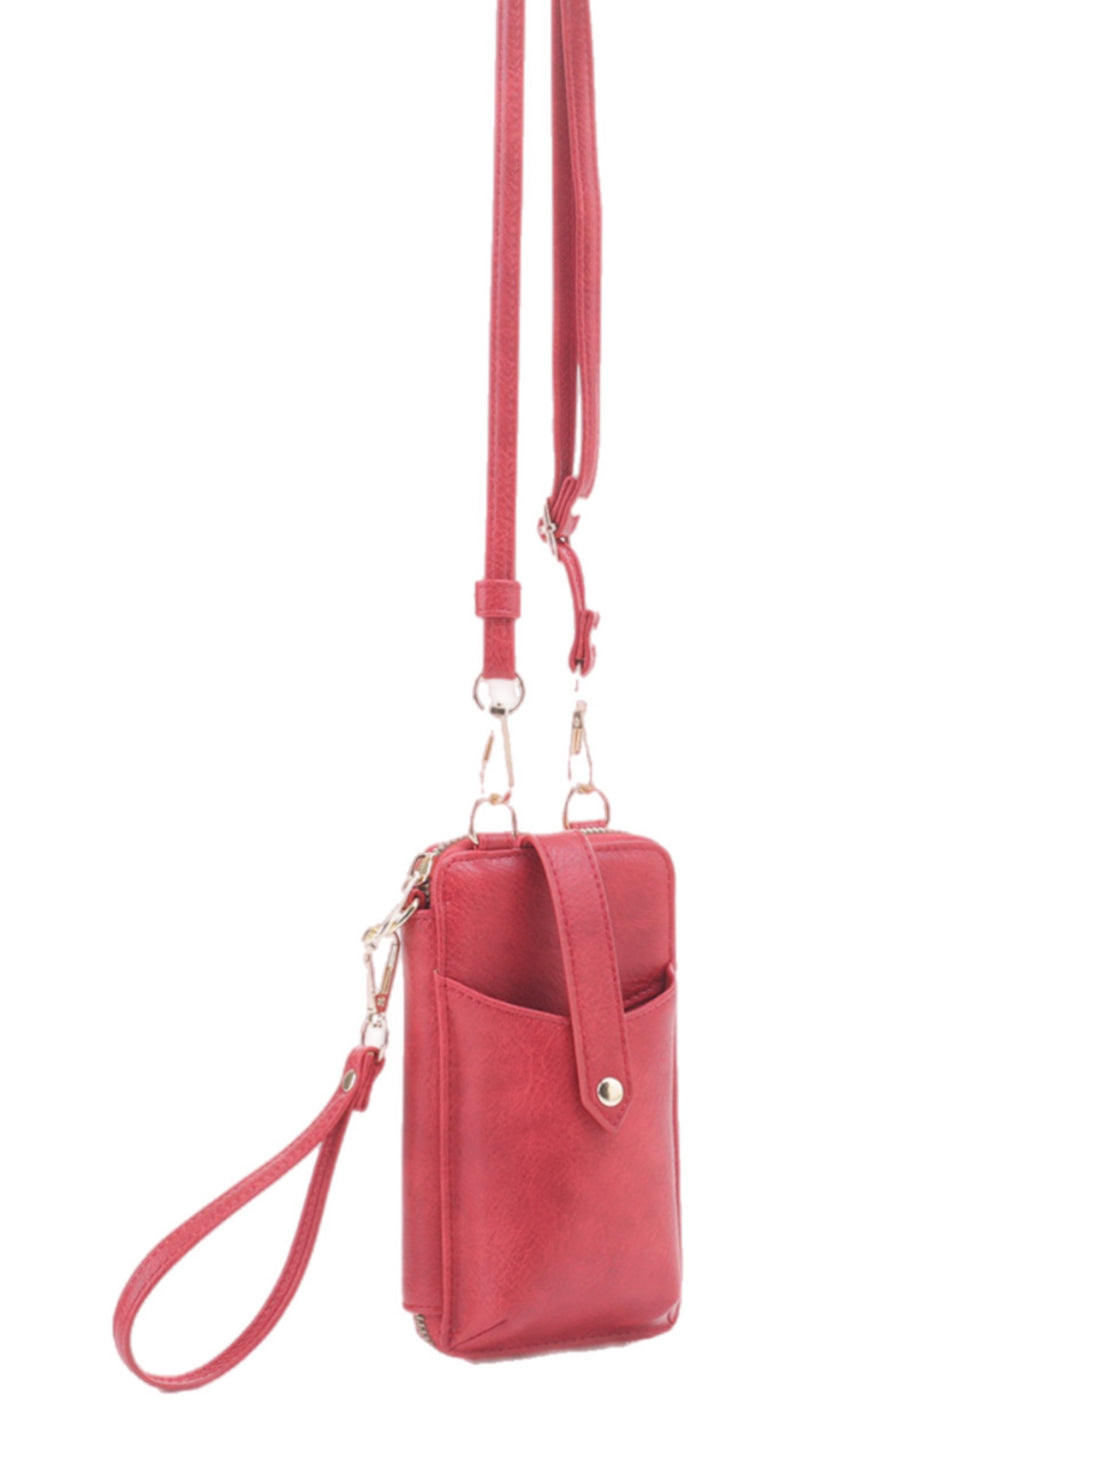 Crossbody Wallet w/ Phone Compartment - Red